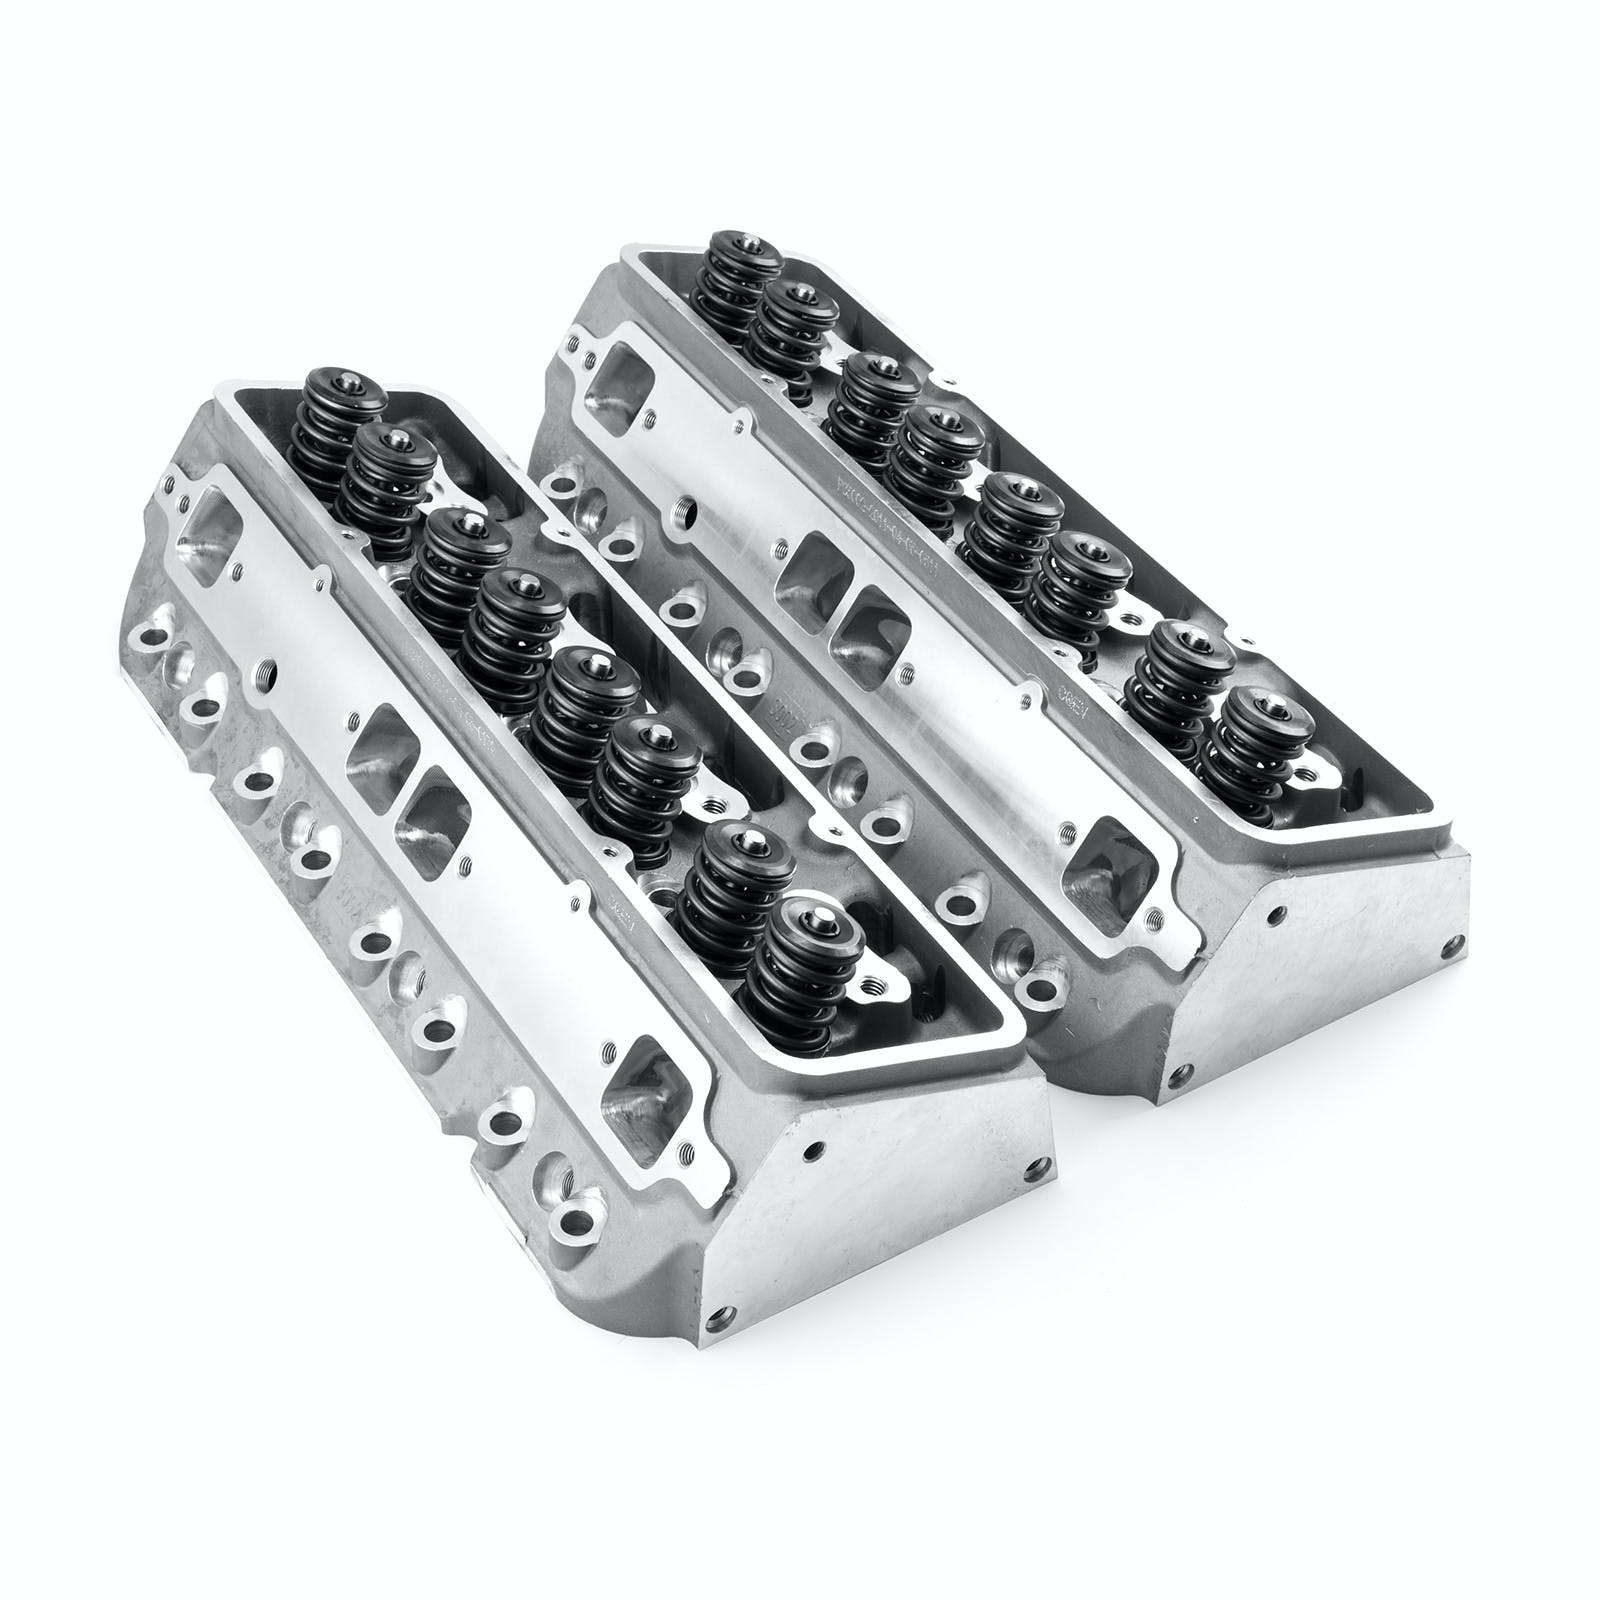 Speedmaster PCE281.2020 217cc 74cc Angle CNC Hydr-R Complete Aluminum Cylinder Heads